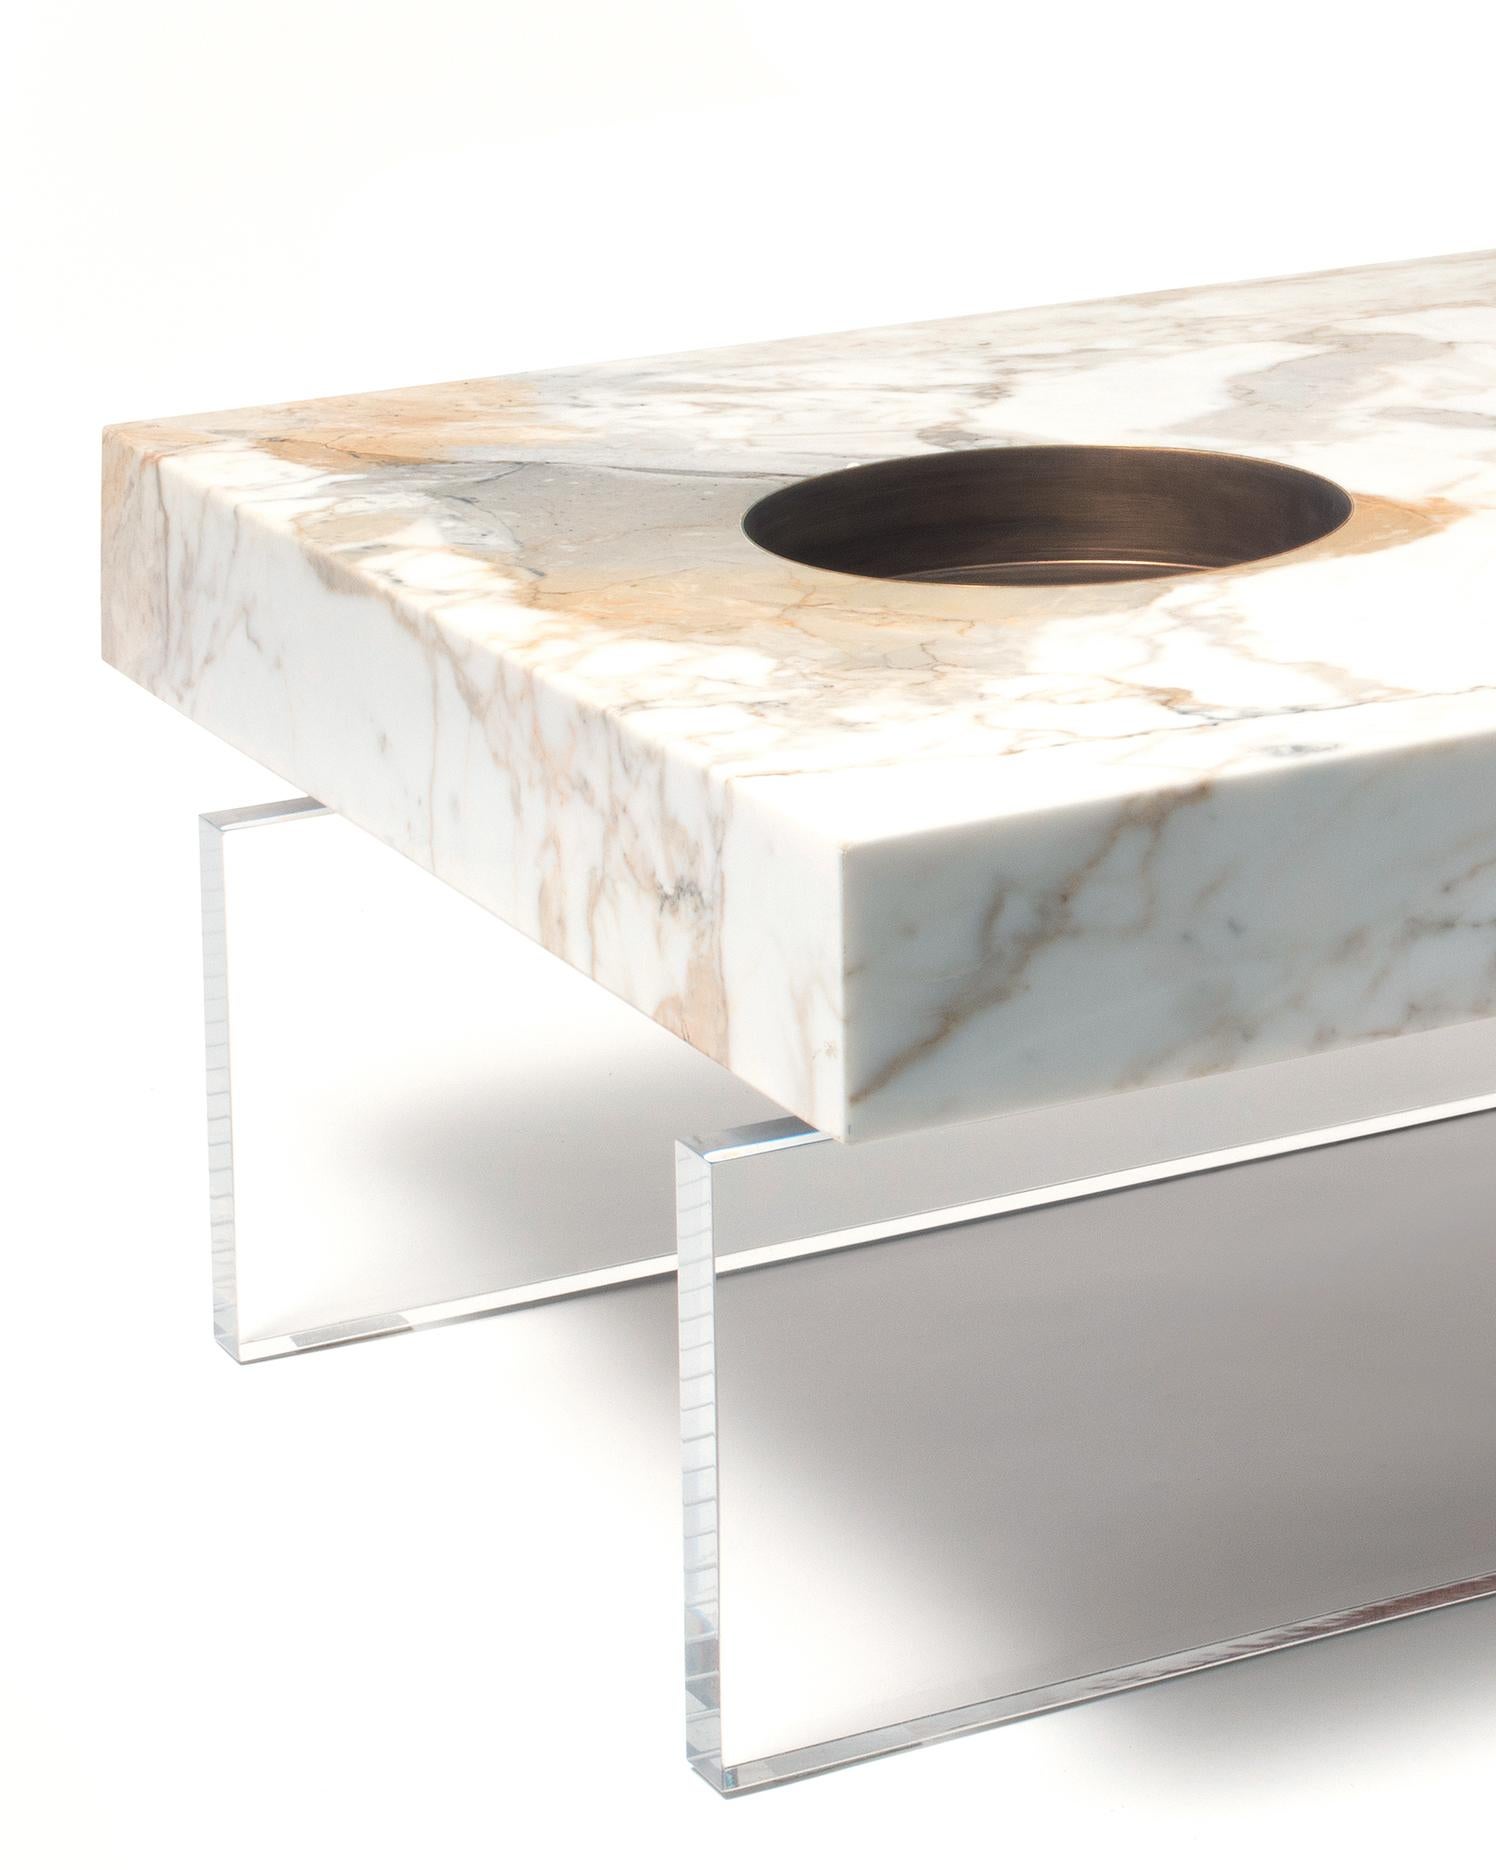 New Modern Coffee Table in Calacatta Gold Marble, creator Stefano Belingardi In New Condition For Sale In Milan, IT